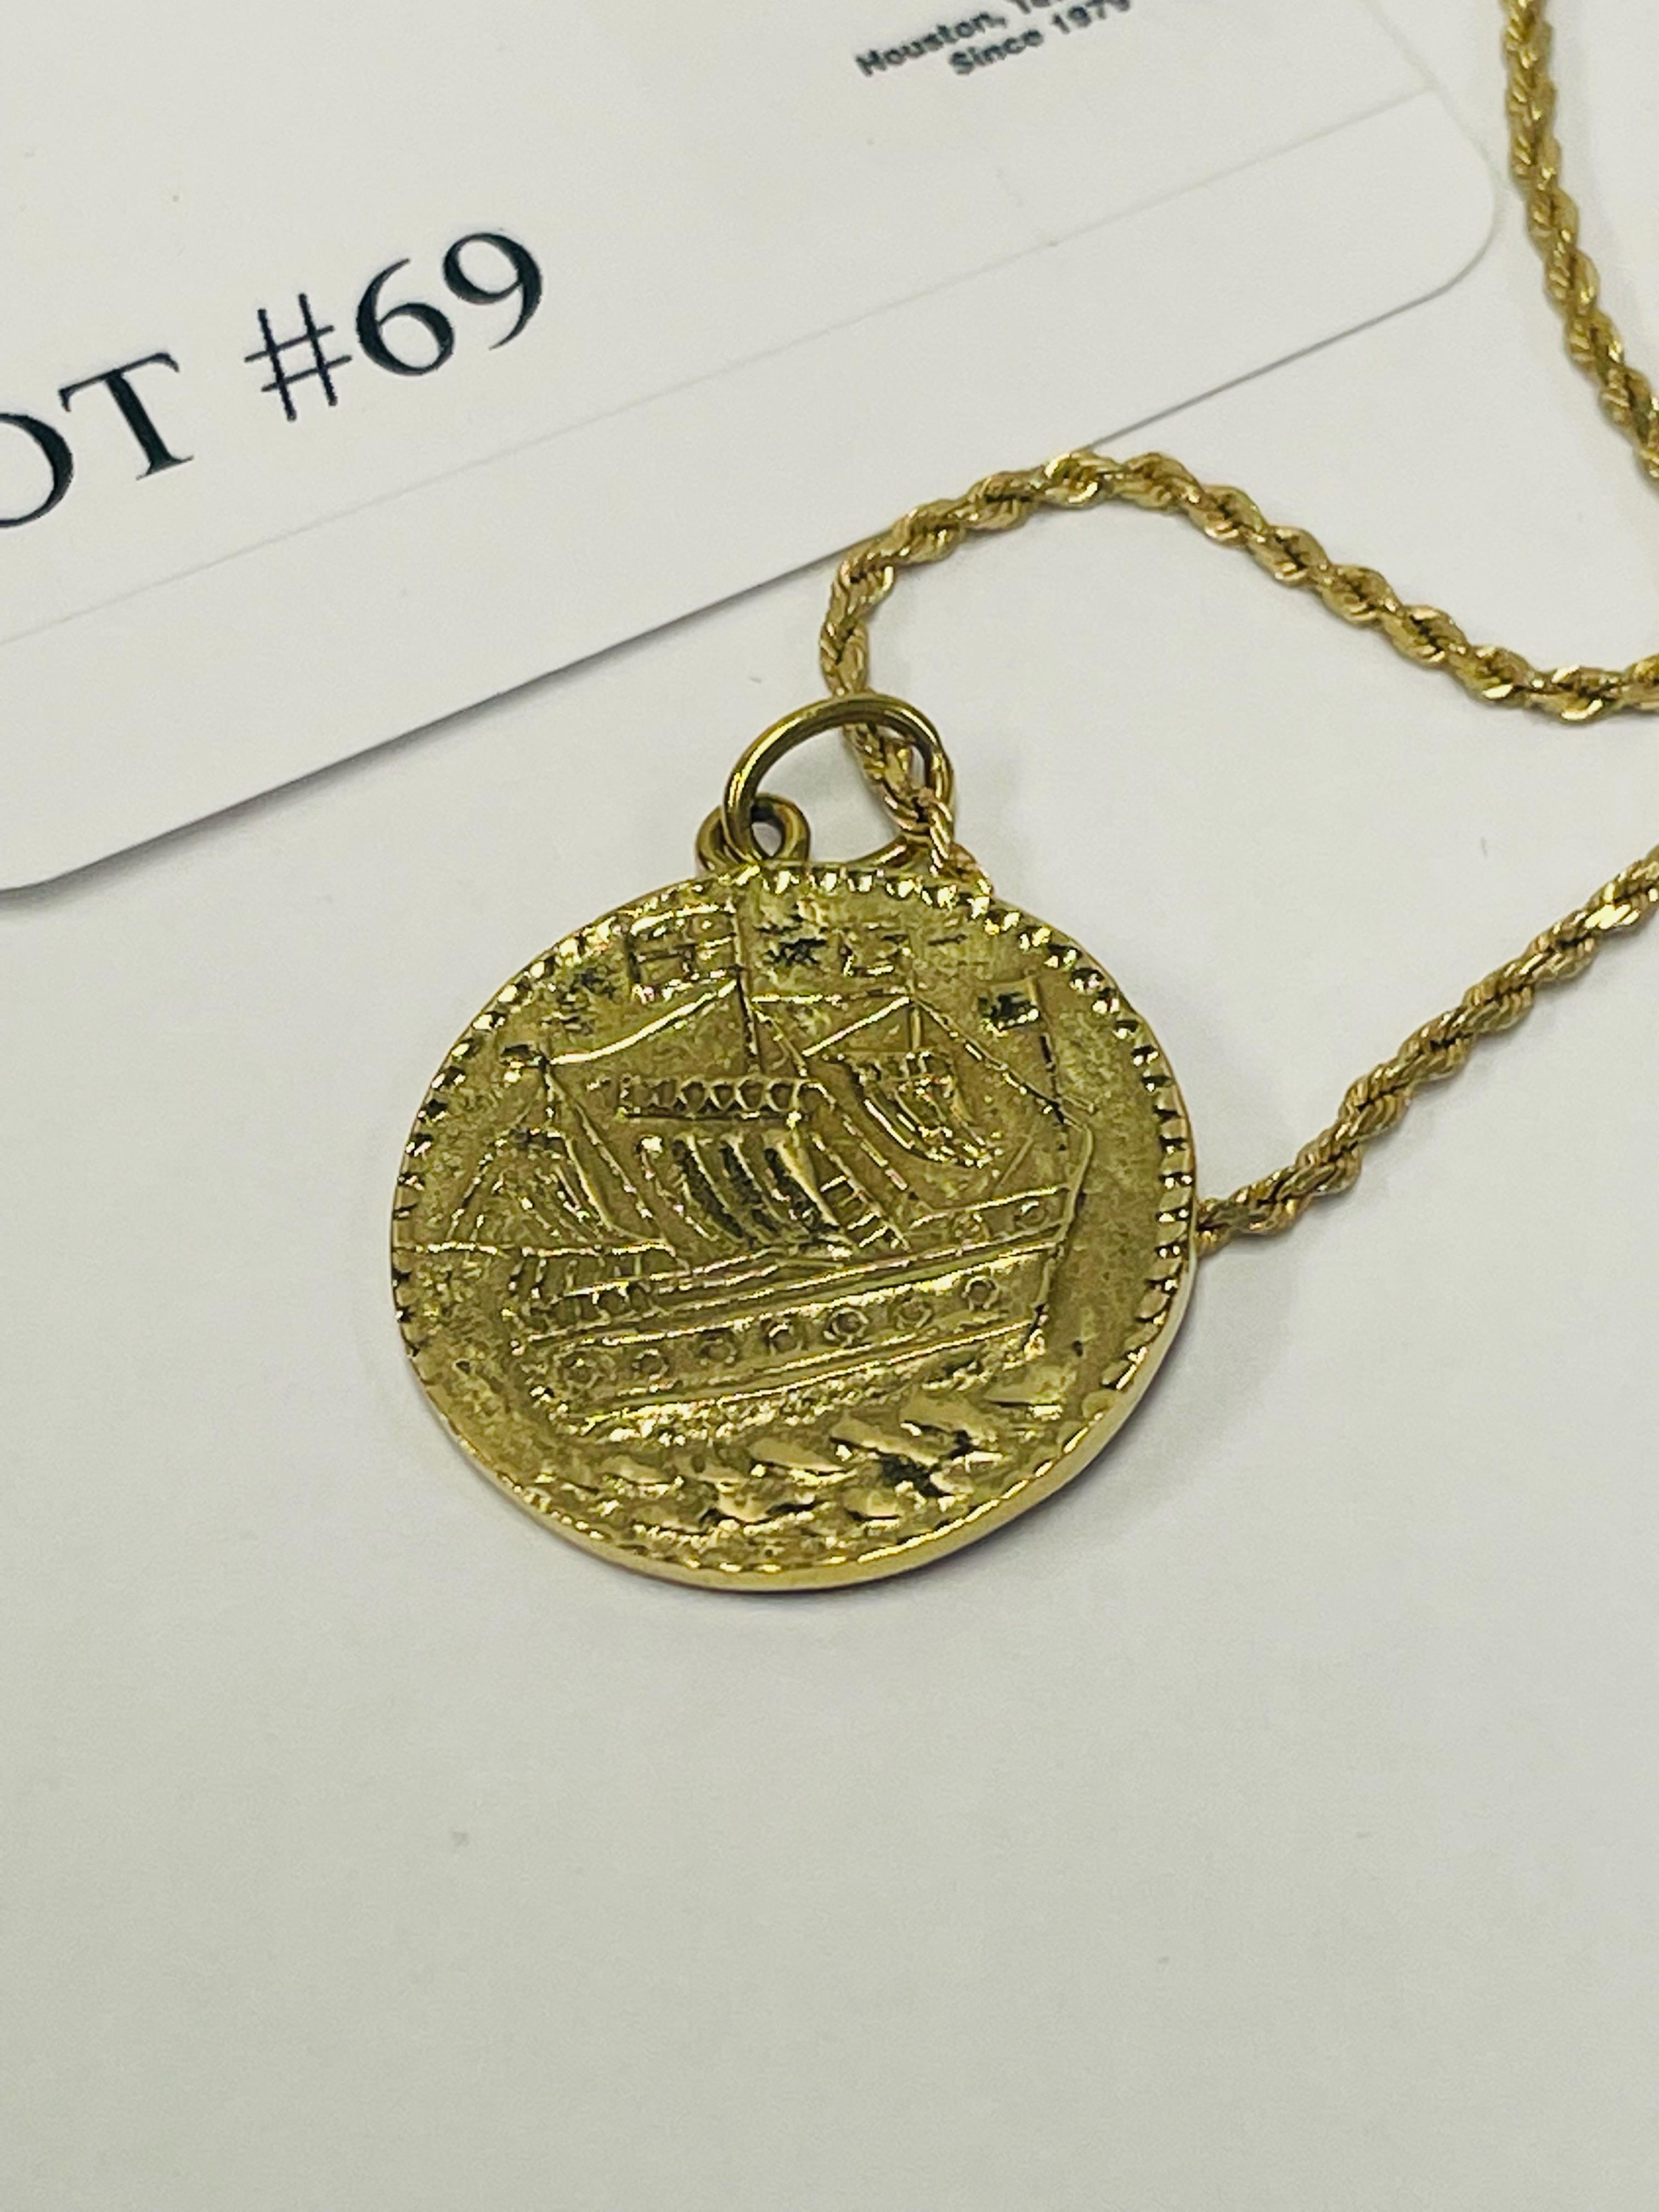 YELLOW GOLD SOMMER ISLAND HOGGE 12 PENCE COIN WITH GOLD ROPE CHAIN